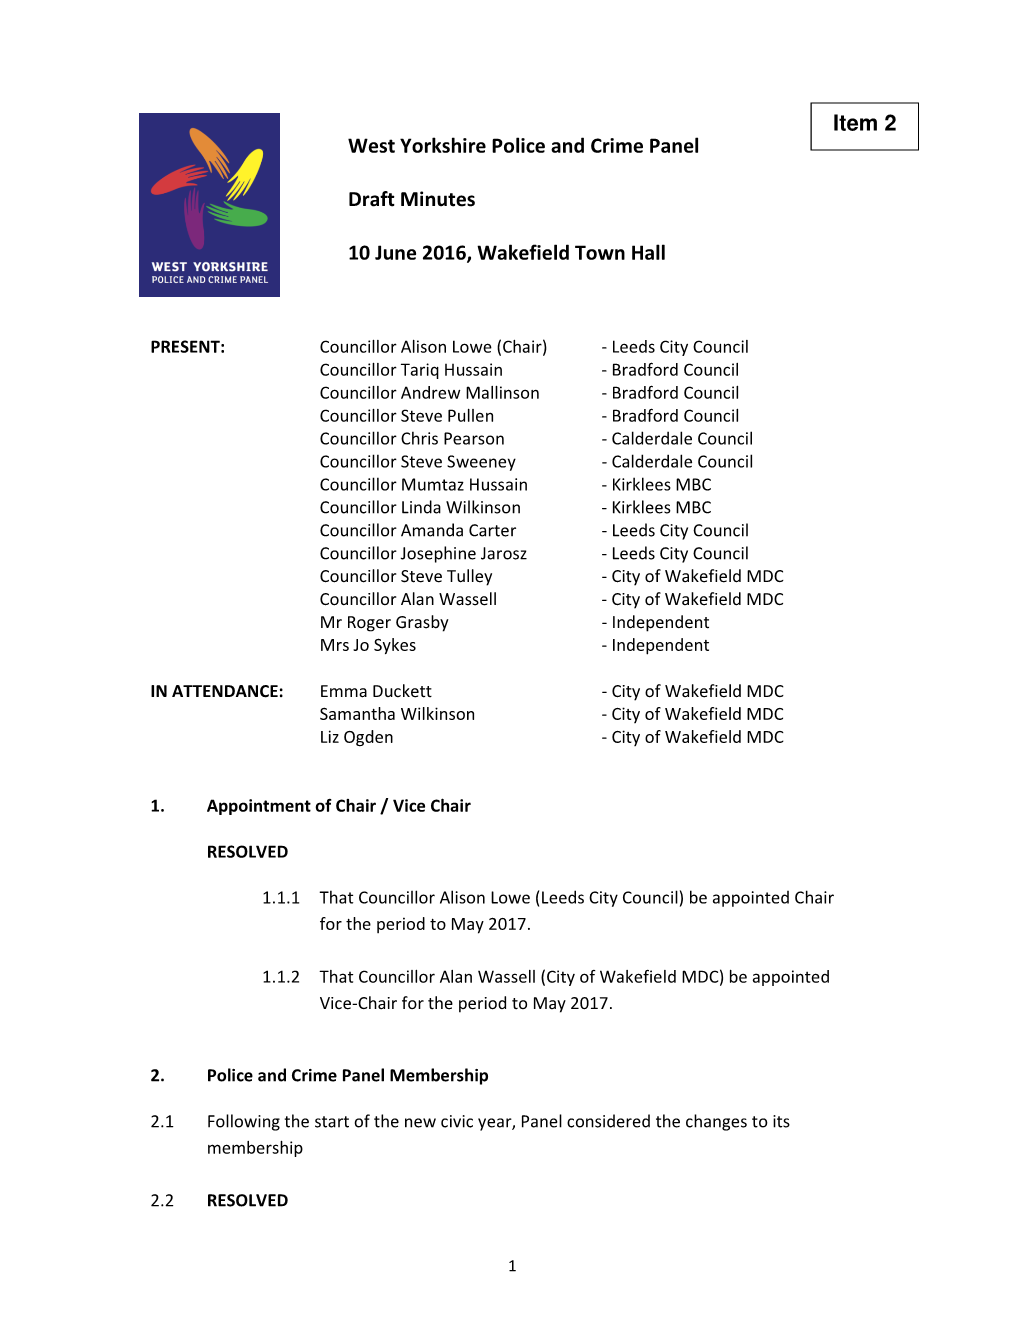 West Yorkshire Police and Crime Panel Draft Minutes 10 June 2016, Wakefield Town Hall Item 2